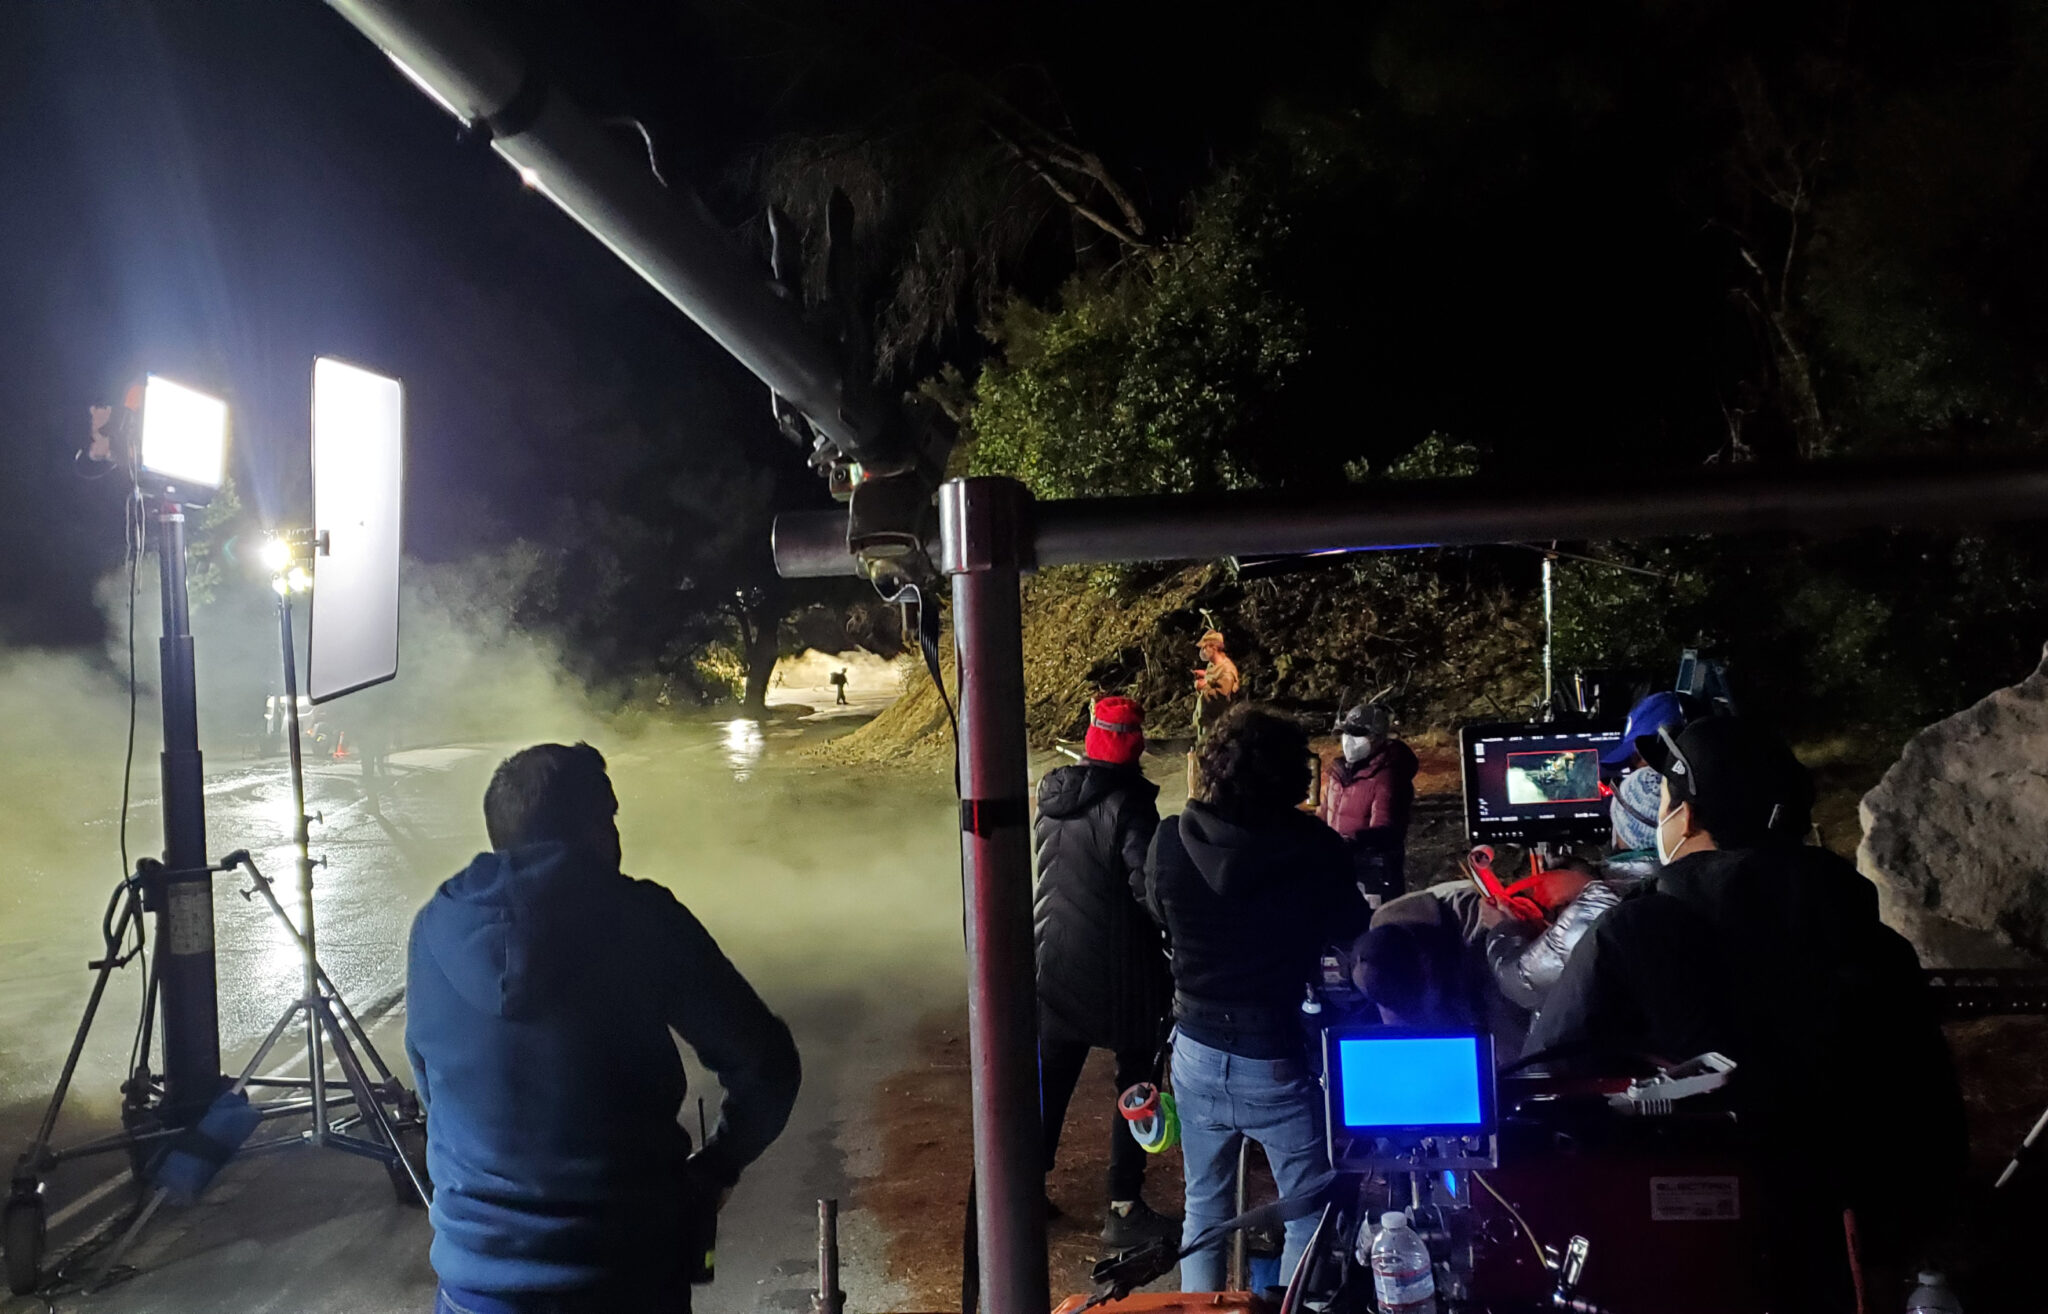 A behind-the-scenes shot of the Berry Law Super Bowl commercial at night, featuring the crew, background lights, and soldiers running by for the scene.